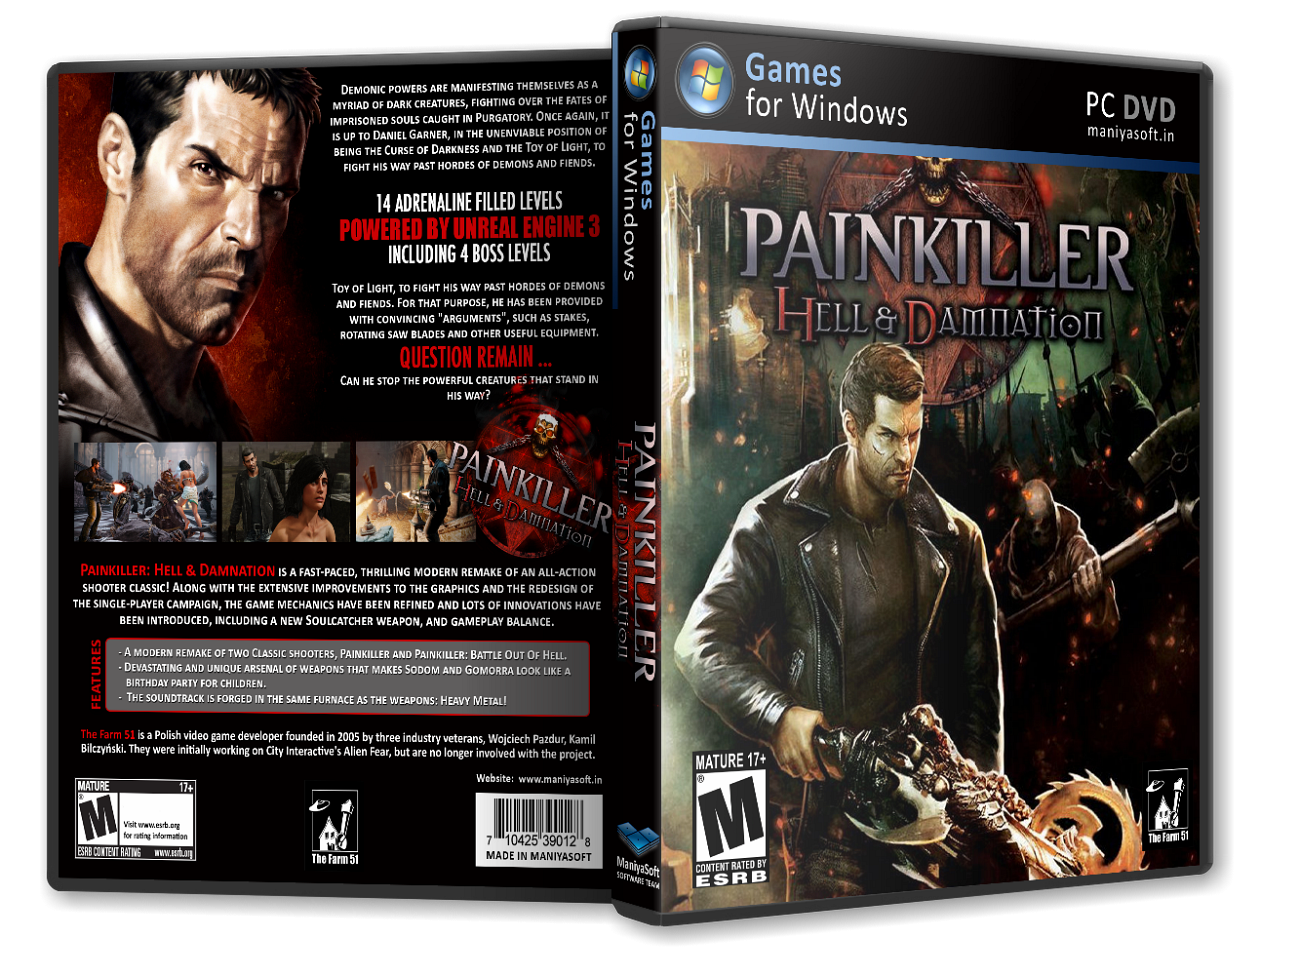 Painkiller: Hell & Damnation box cover